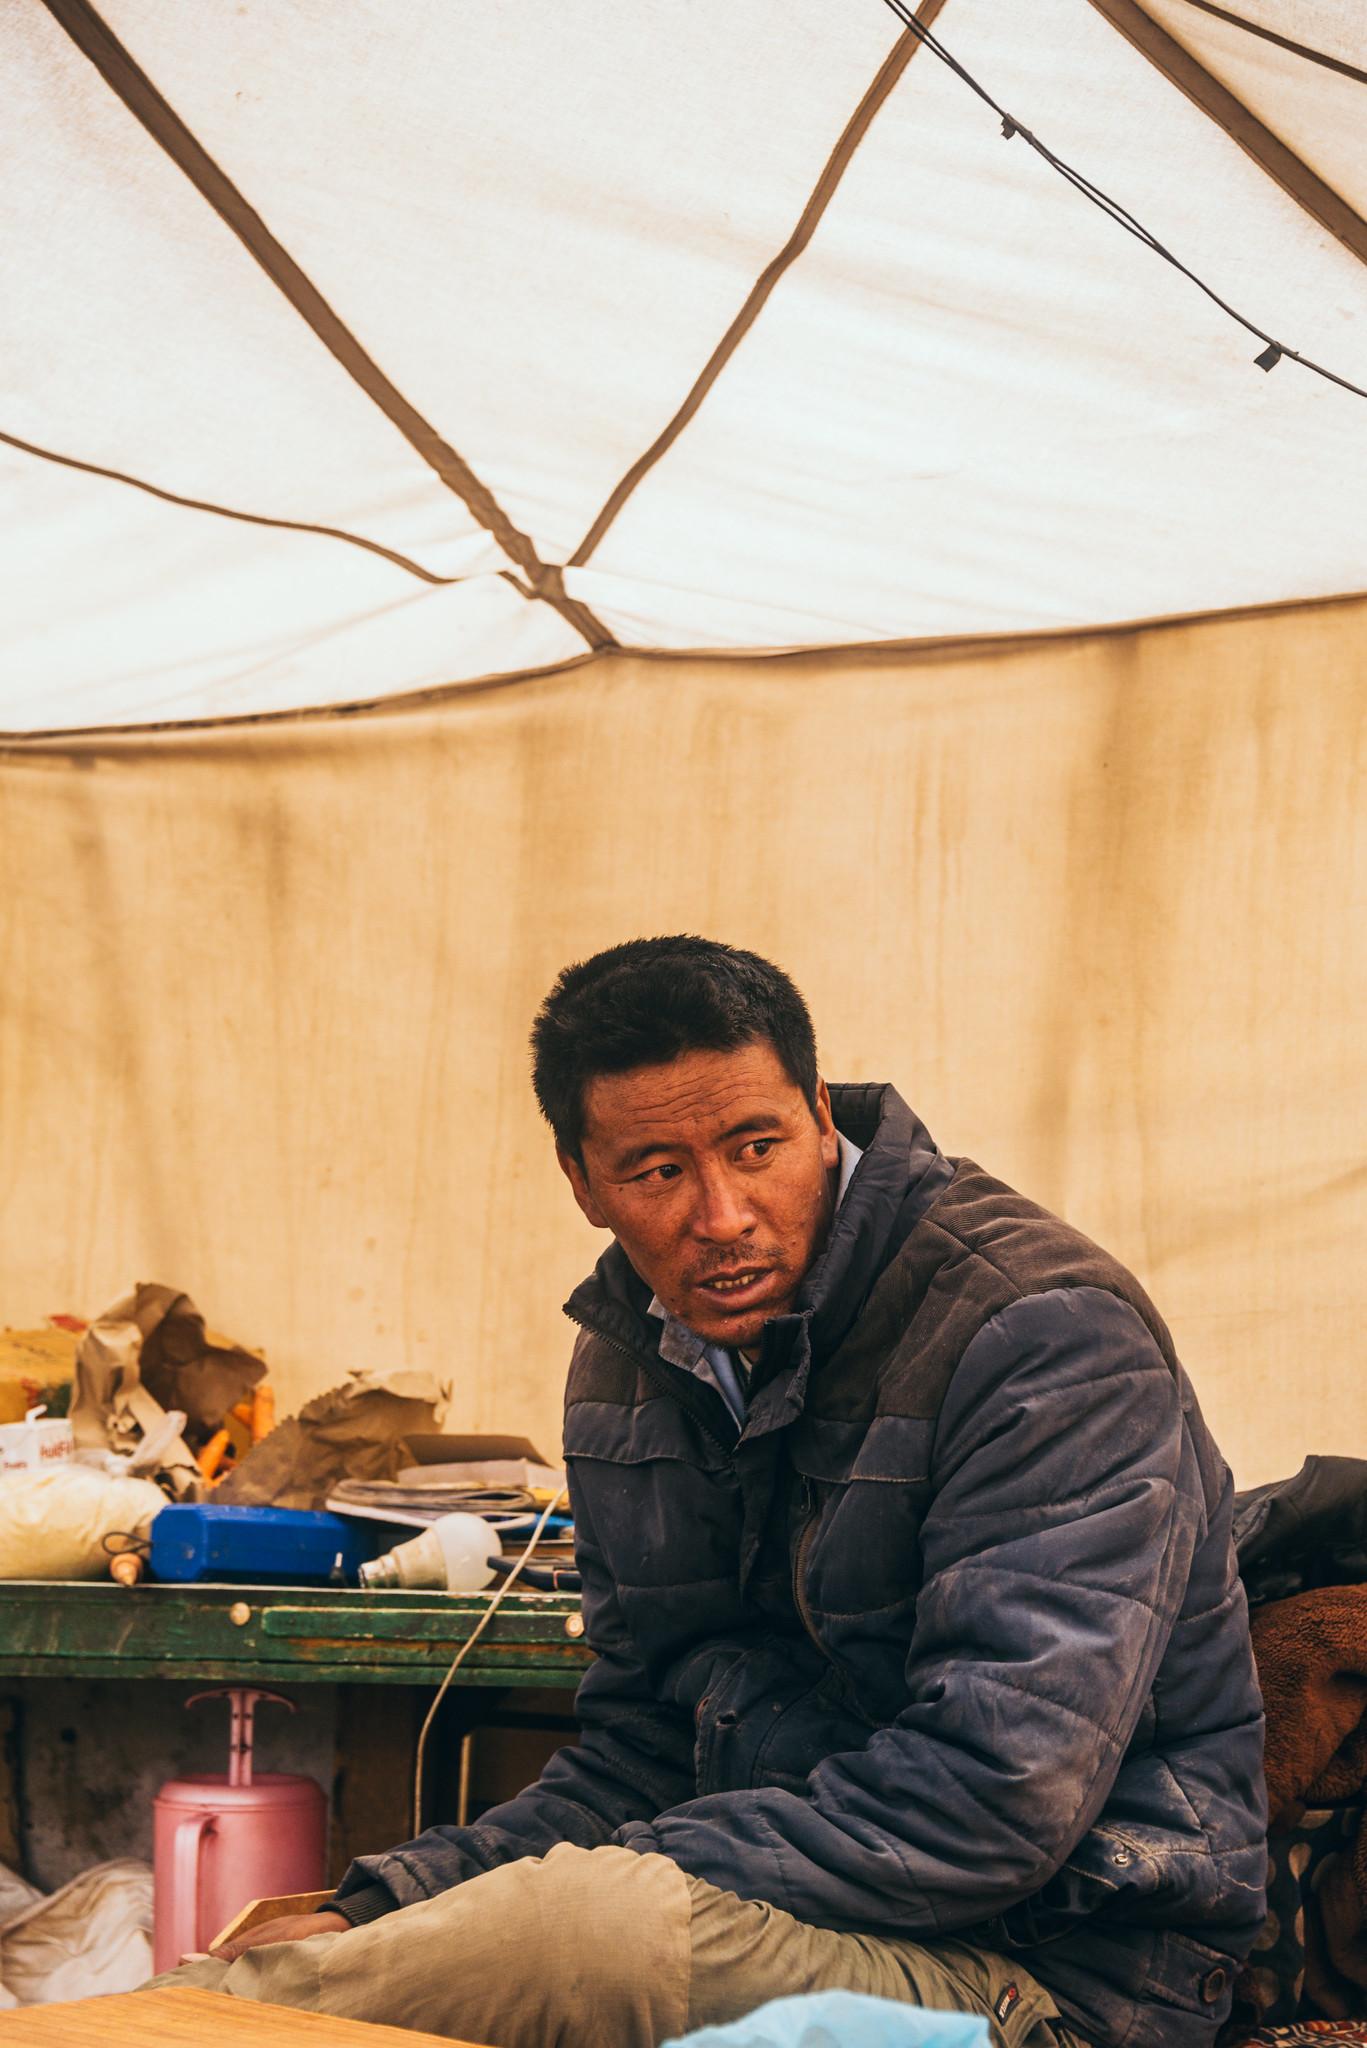 A Man in Canteen Tent